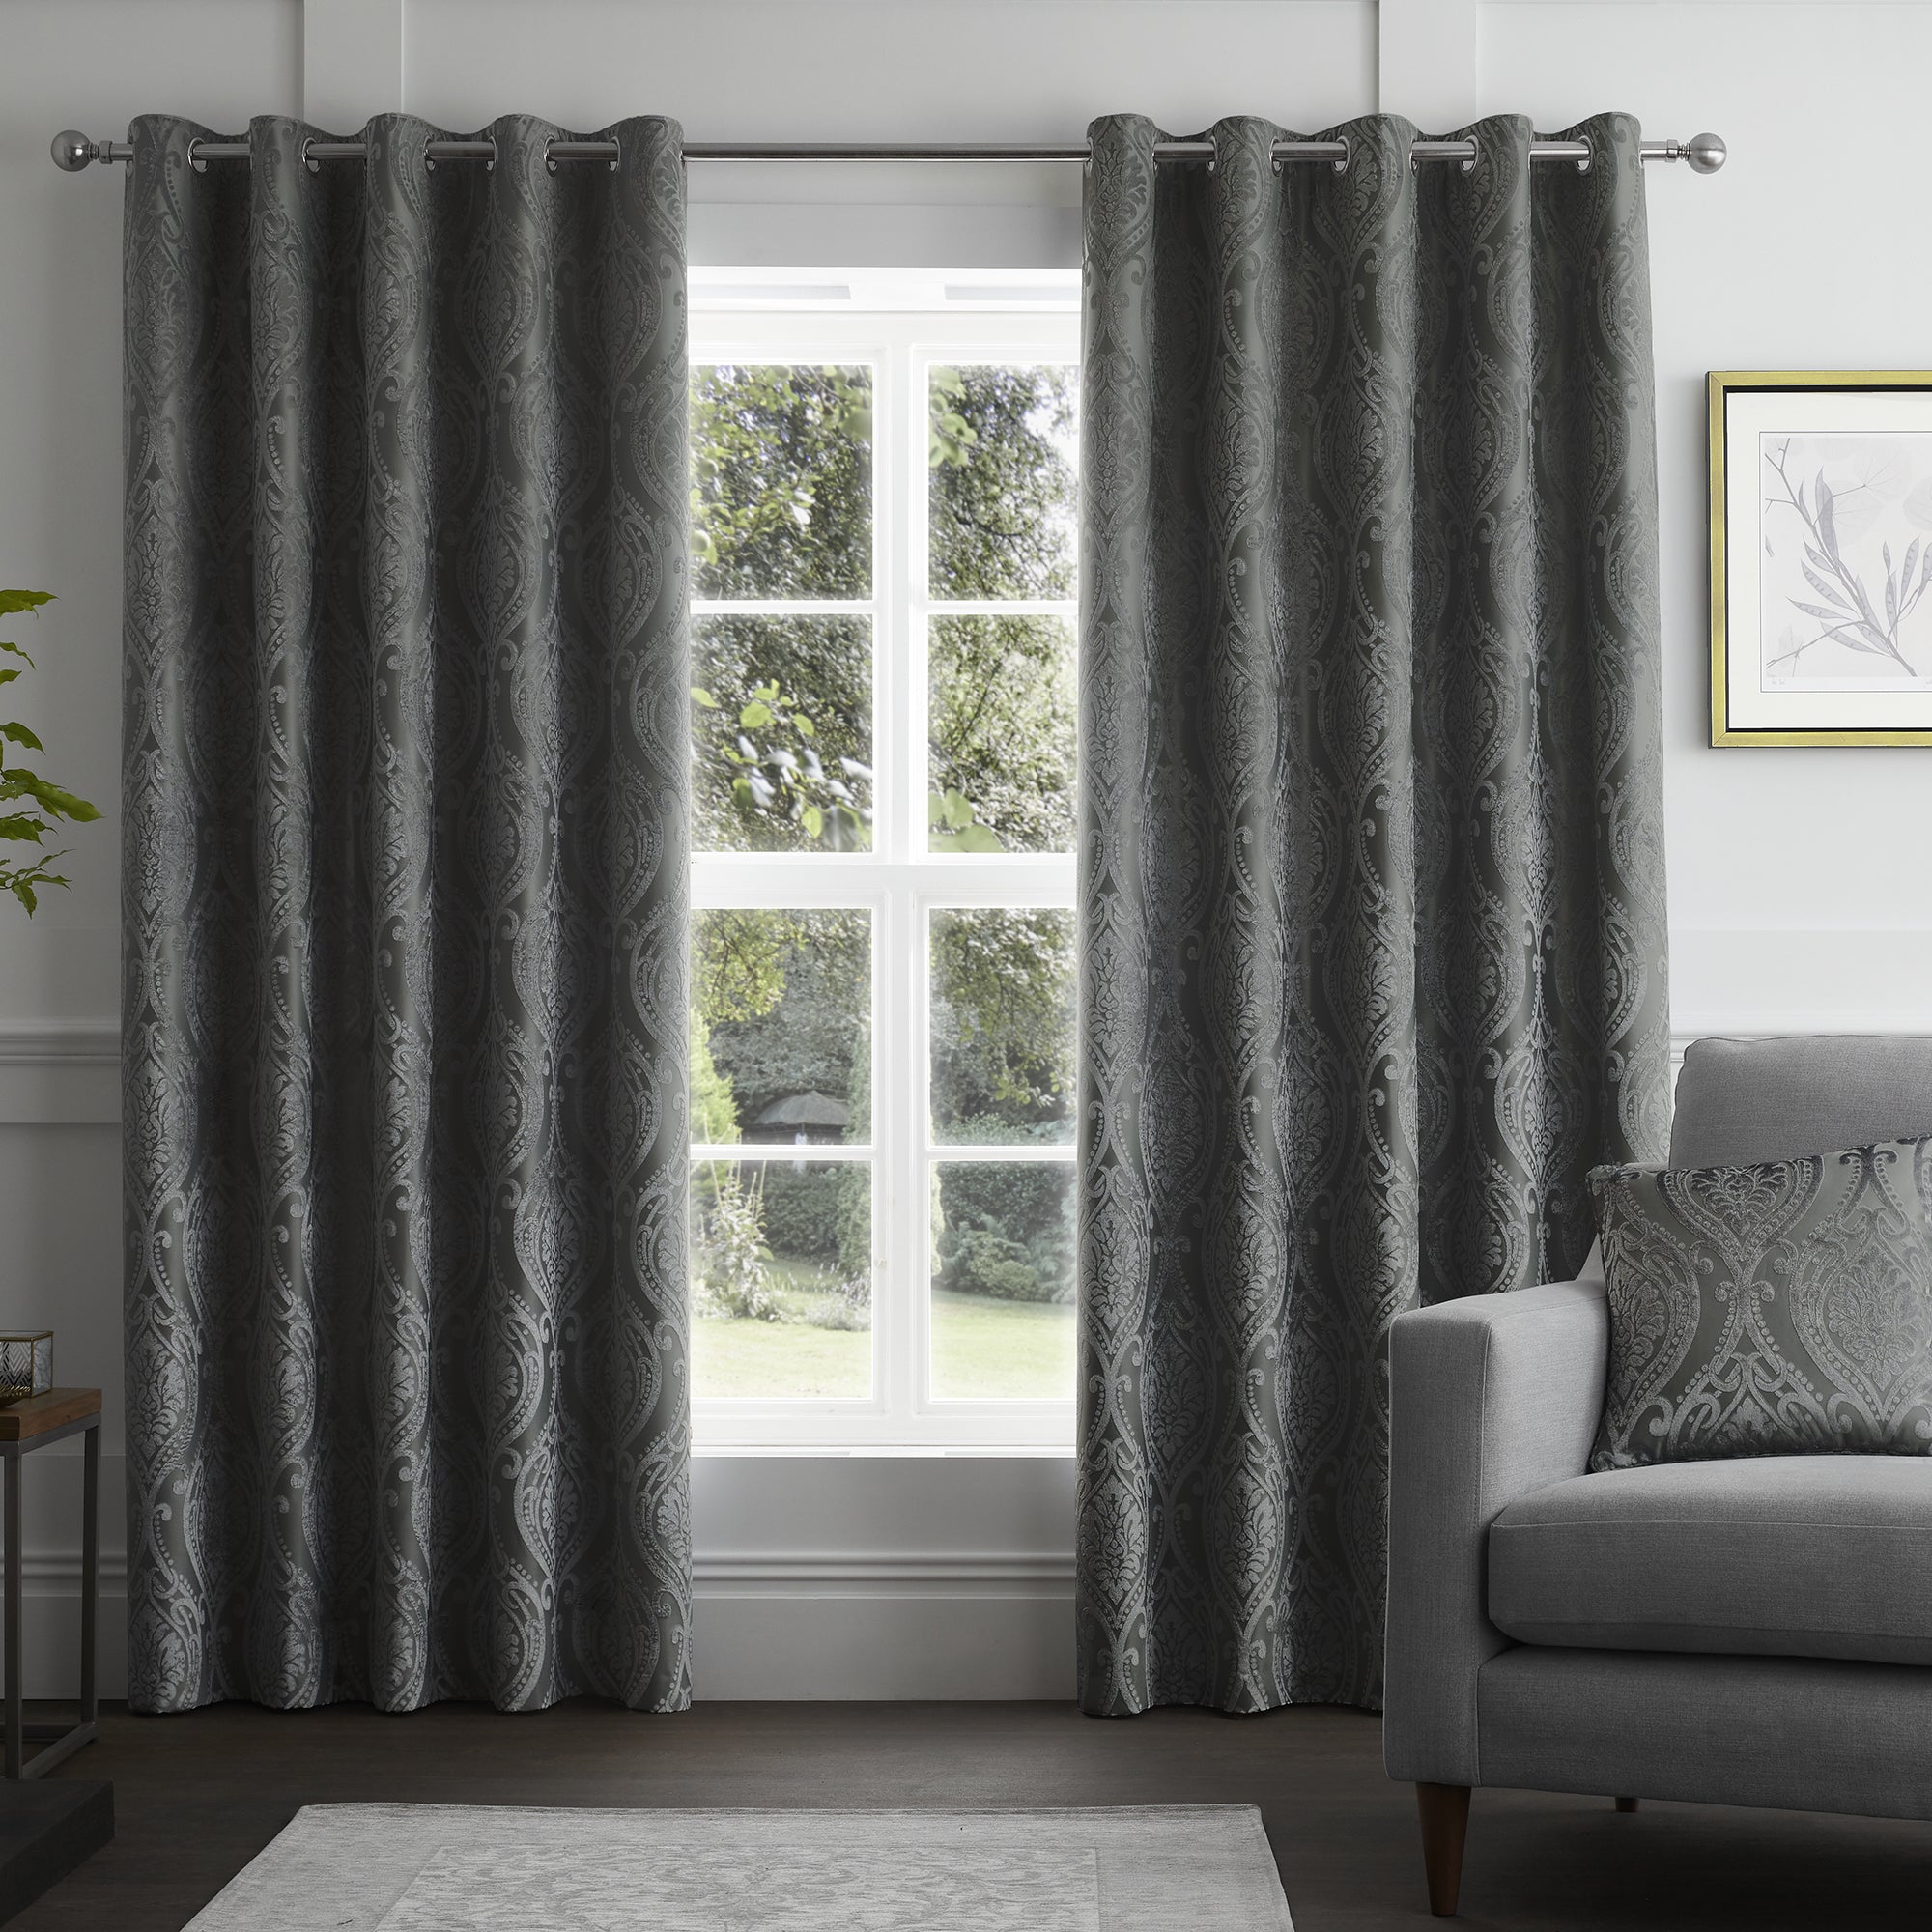 Chateau - Jacquard Pair of Eyelet Curtains in Slate - By Curtina